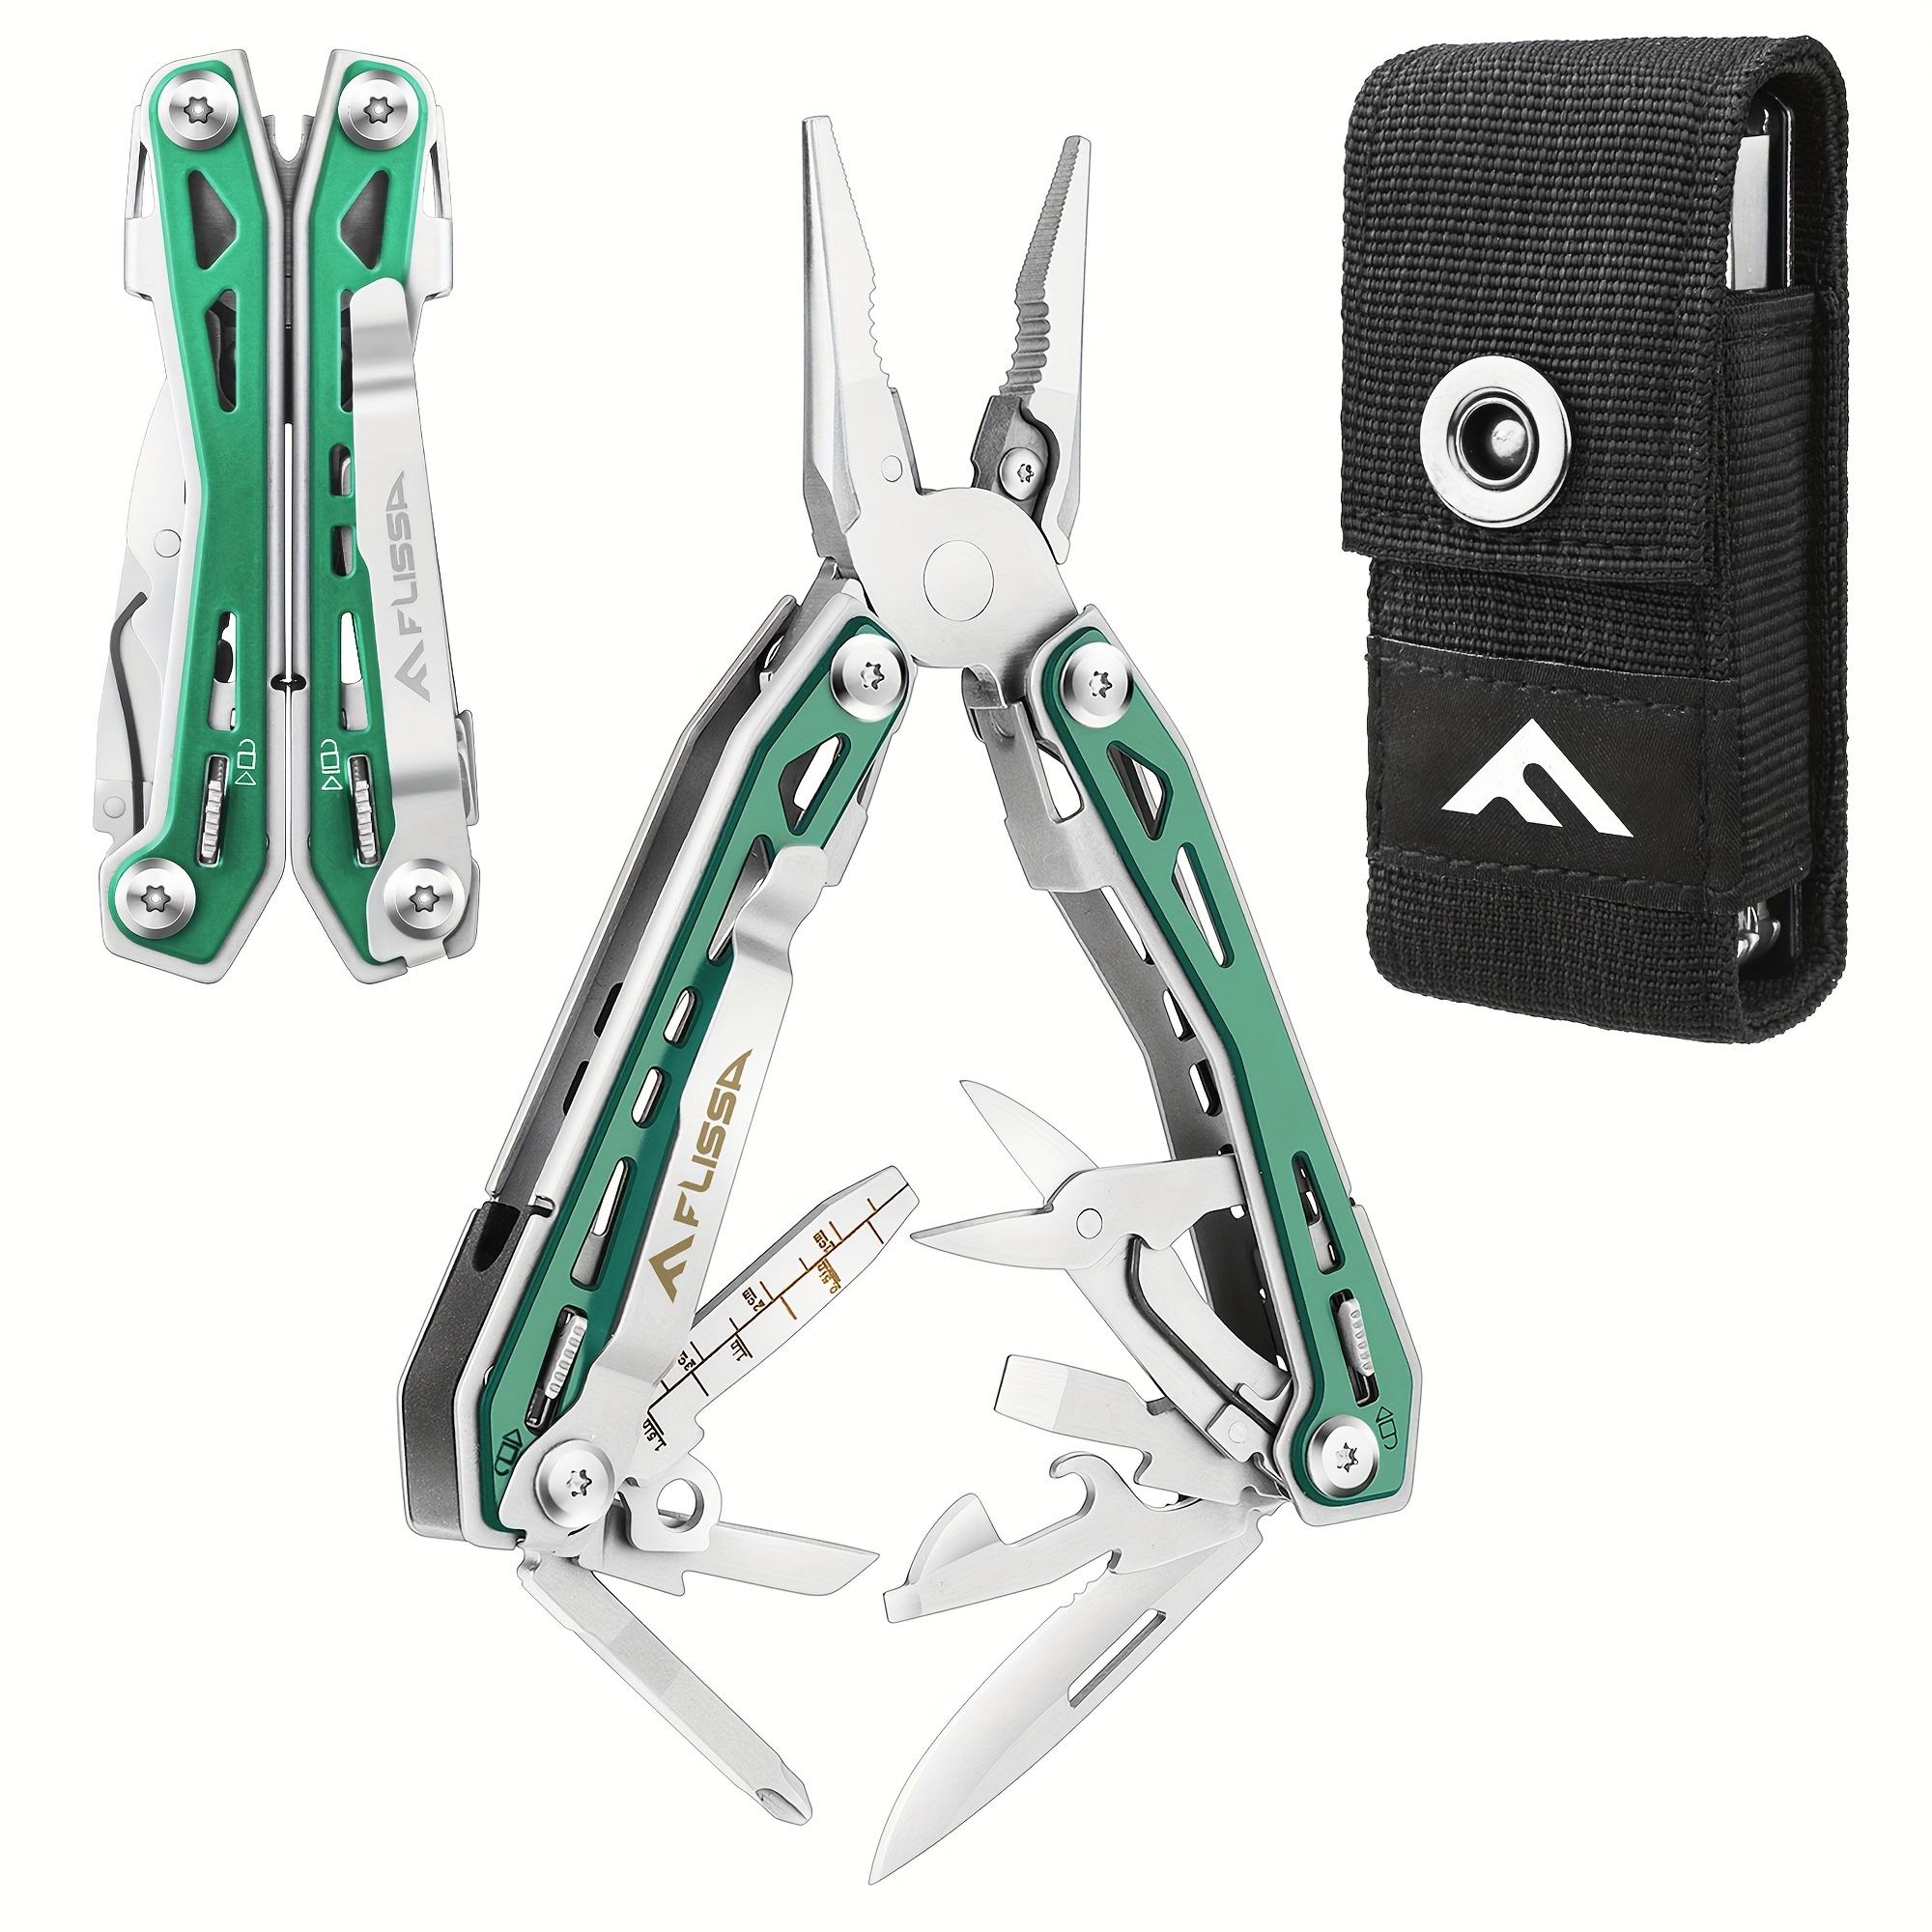 

Flissa Multi Tool Pliers, Green 16 In 1 Stainless Steel Multipurpose Tool With Tactical Multitool Knife, Screwdrivers, Saw, Bottle Opener And Durable Sheath, For Outdoor Adventures